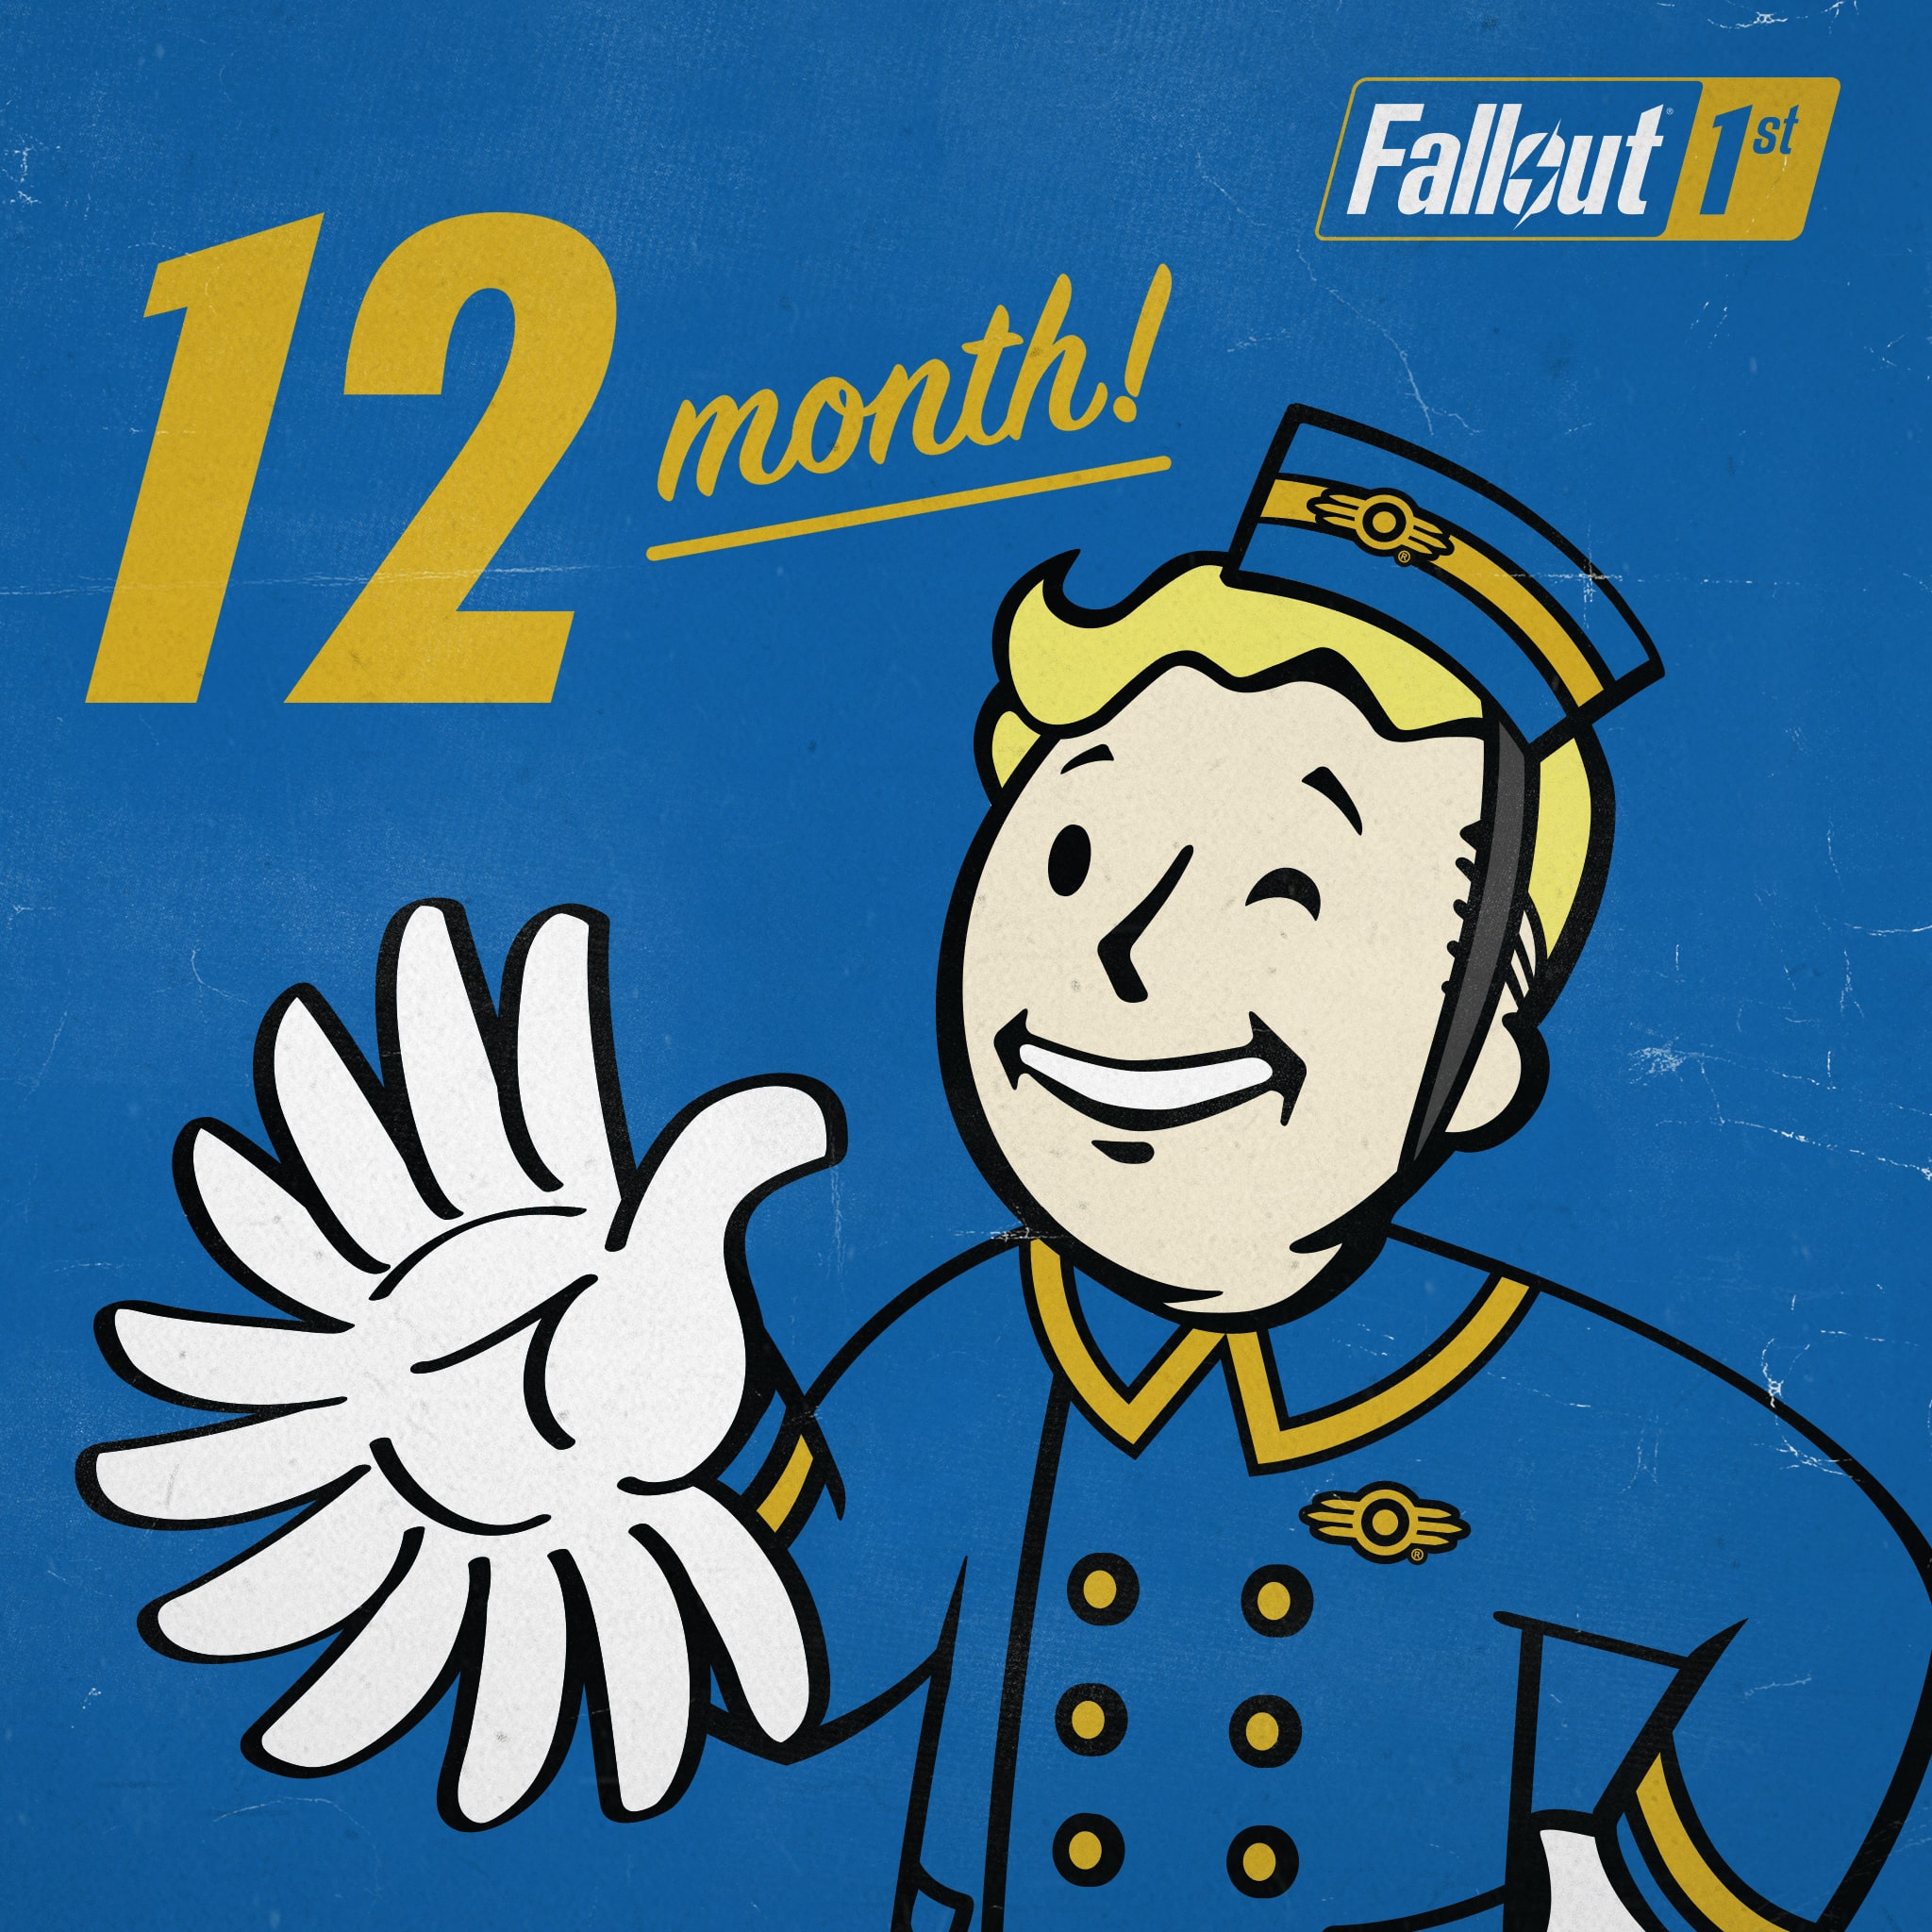 playstation now fallout